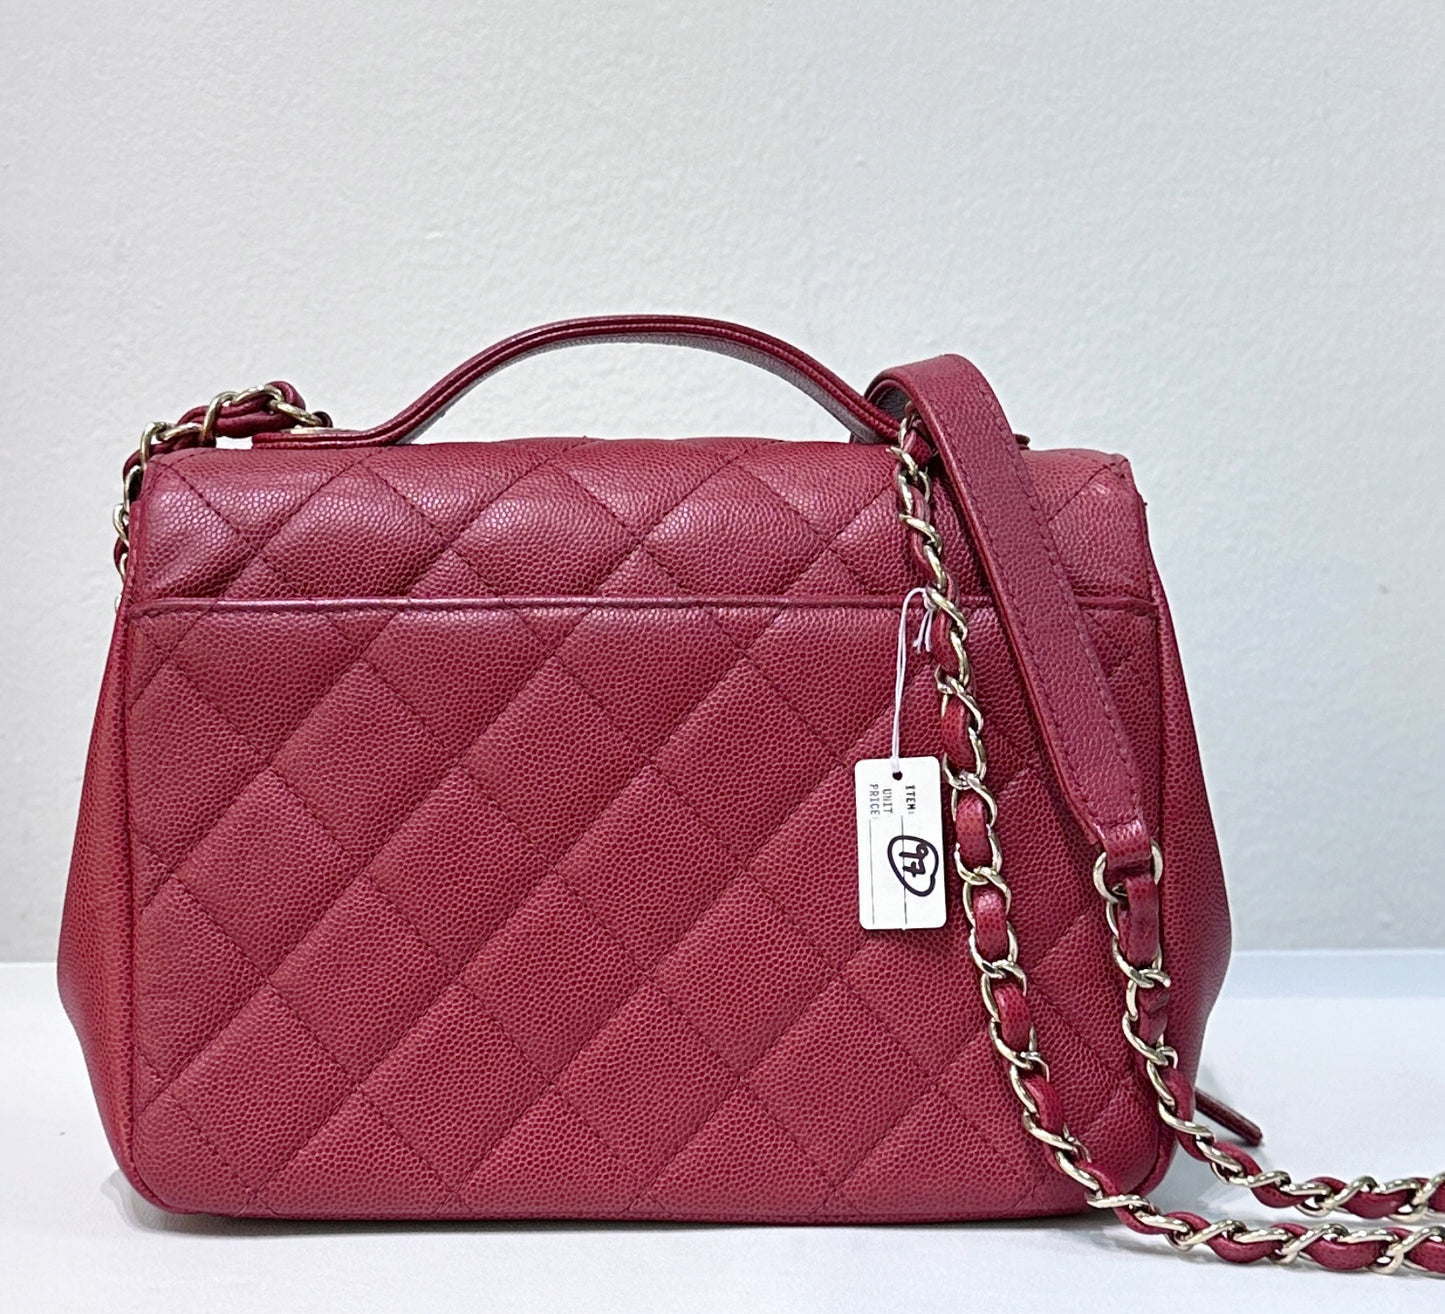 CHANEL Small Business Affinity Bag